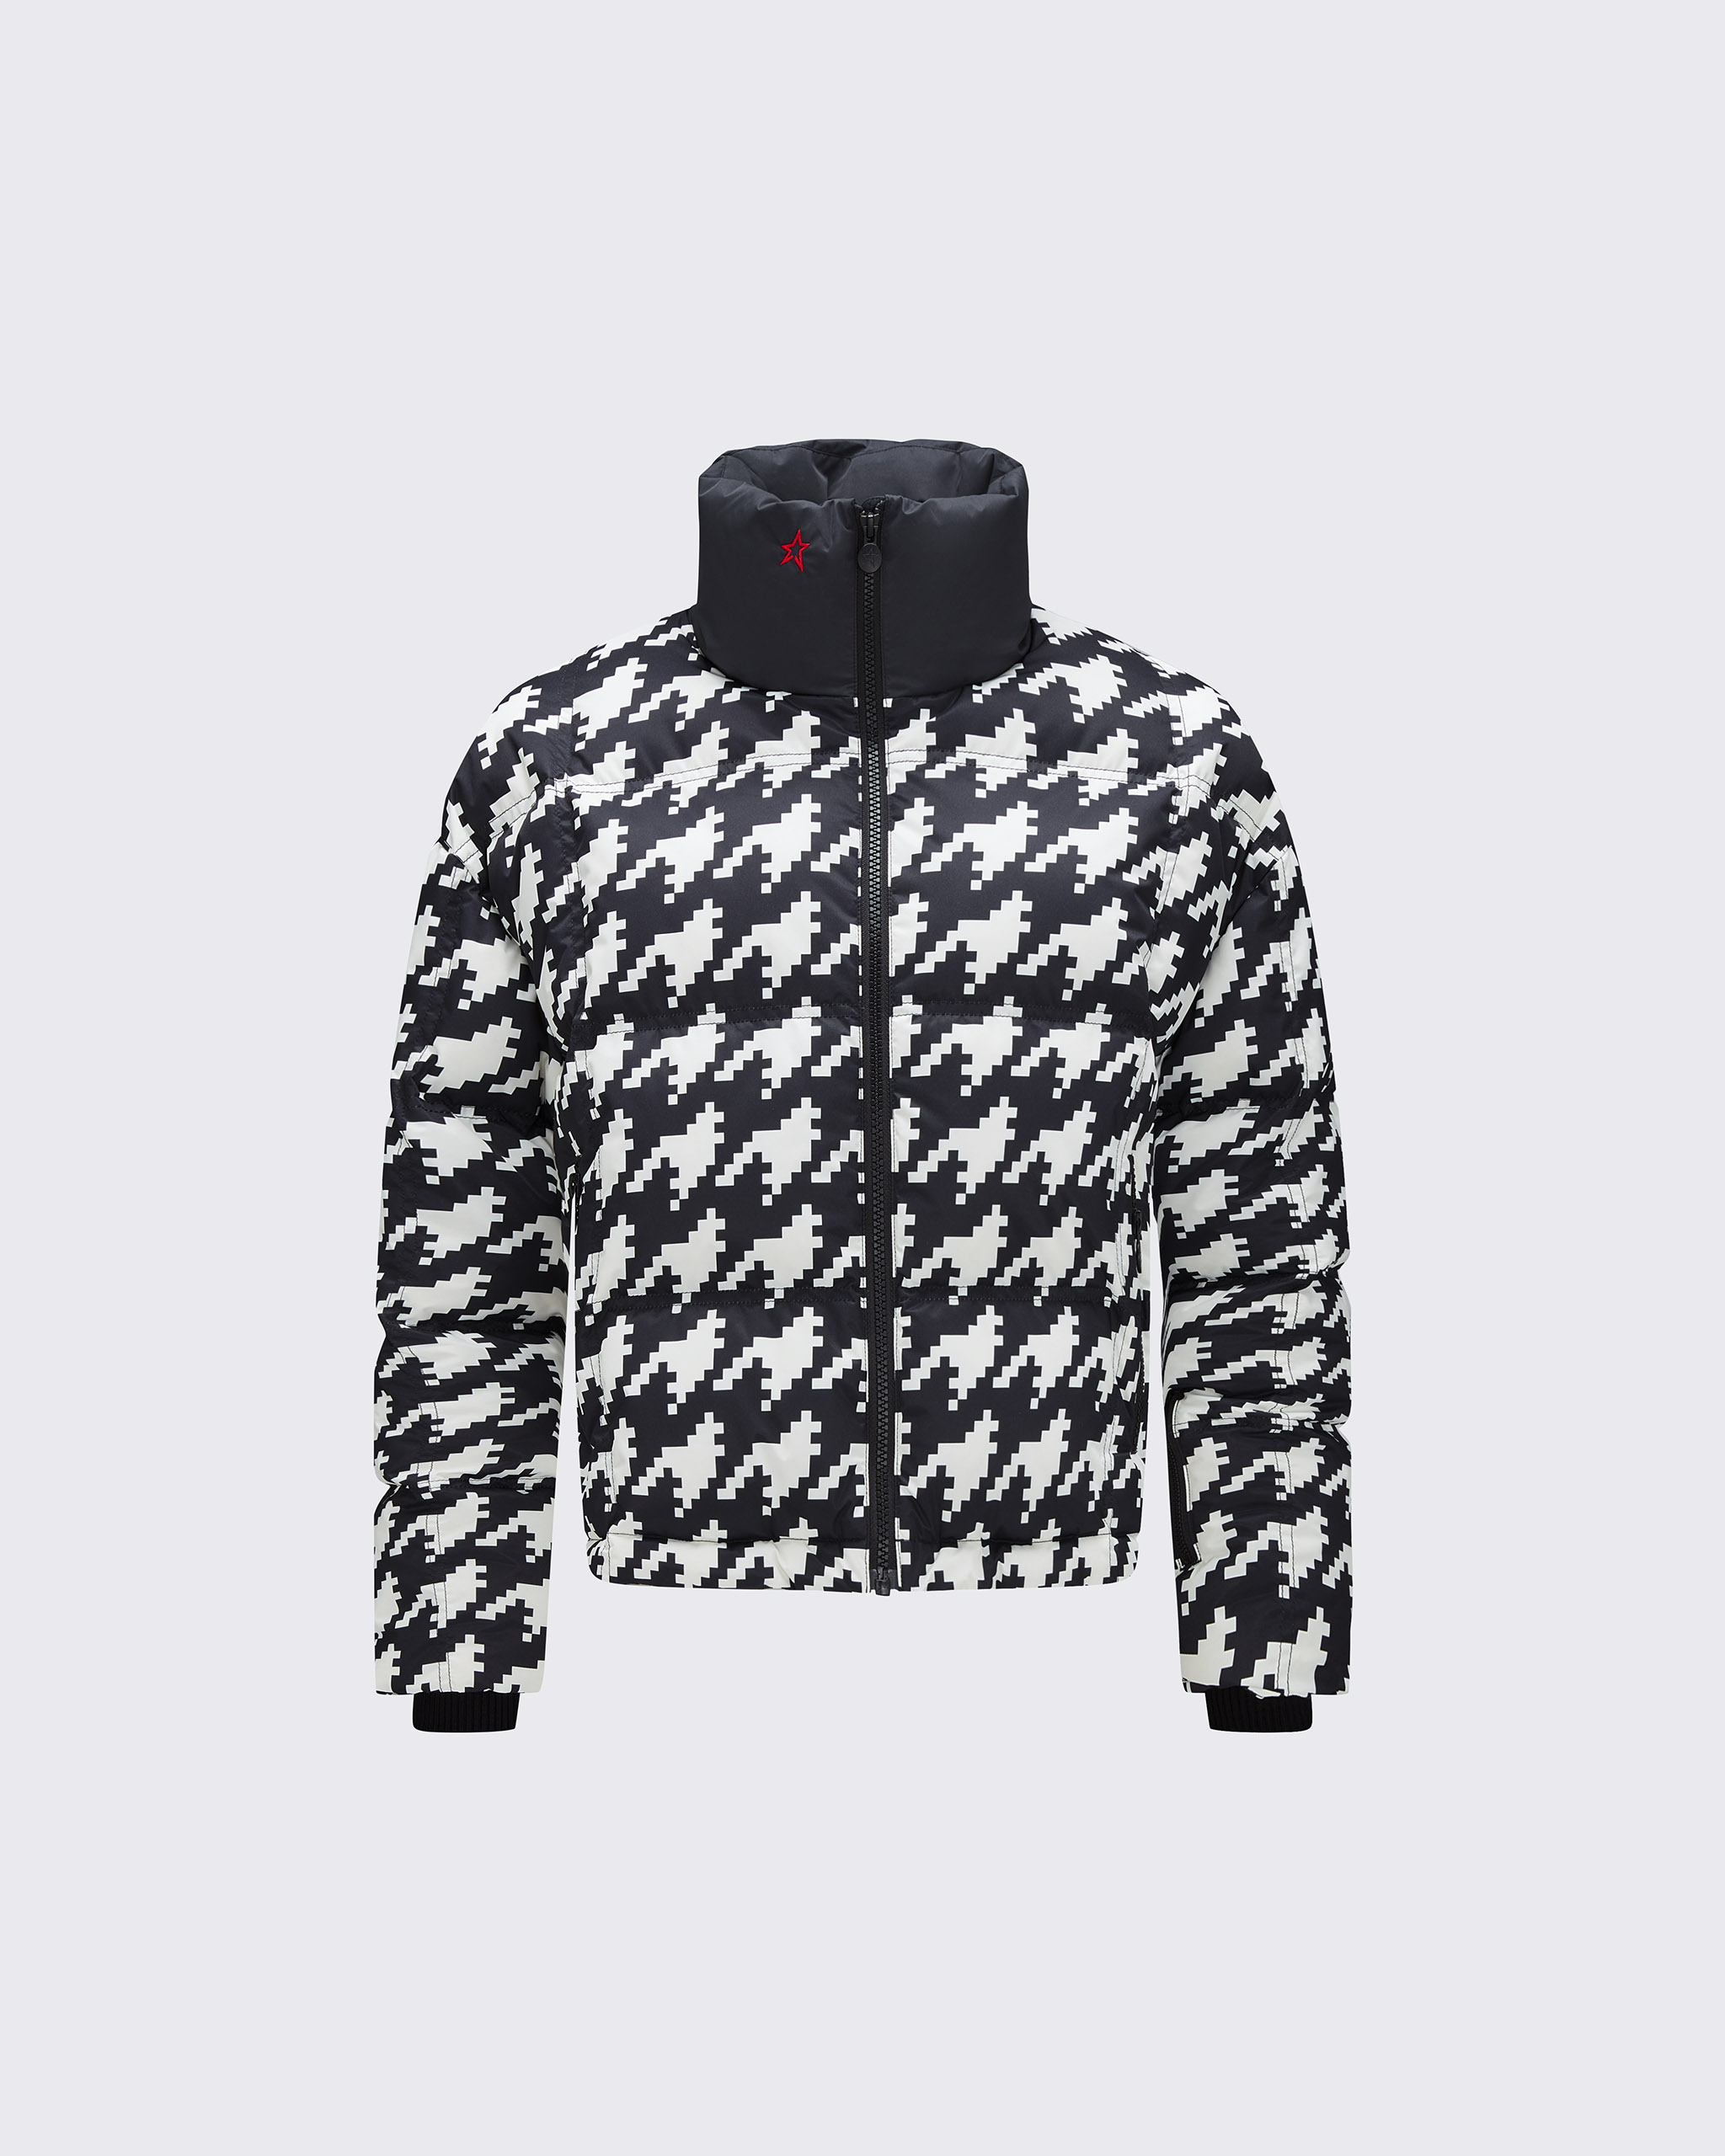 Perfect Moment Nevada Duvet Houndstooth Ski Jacket In Houndstooth-black-snow-white